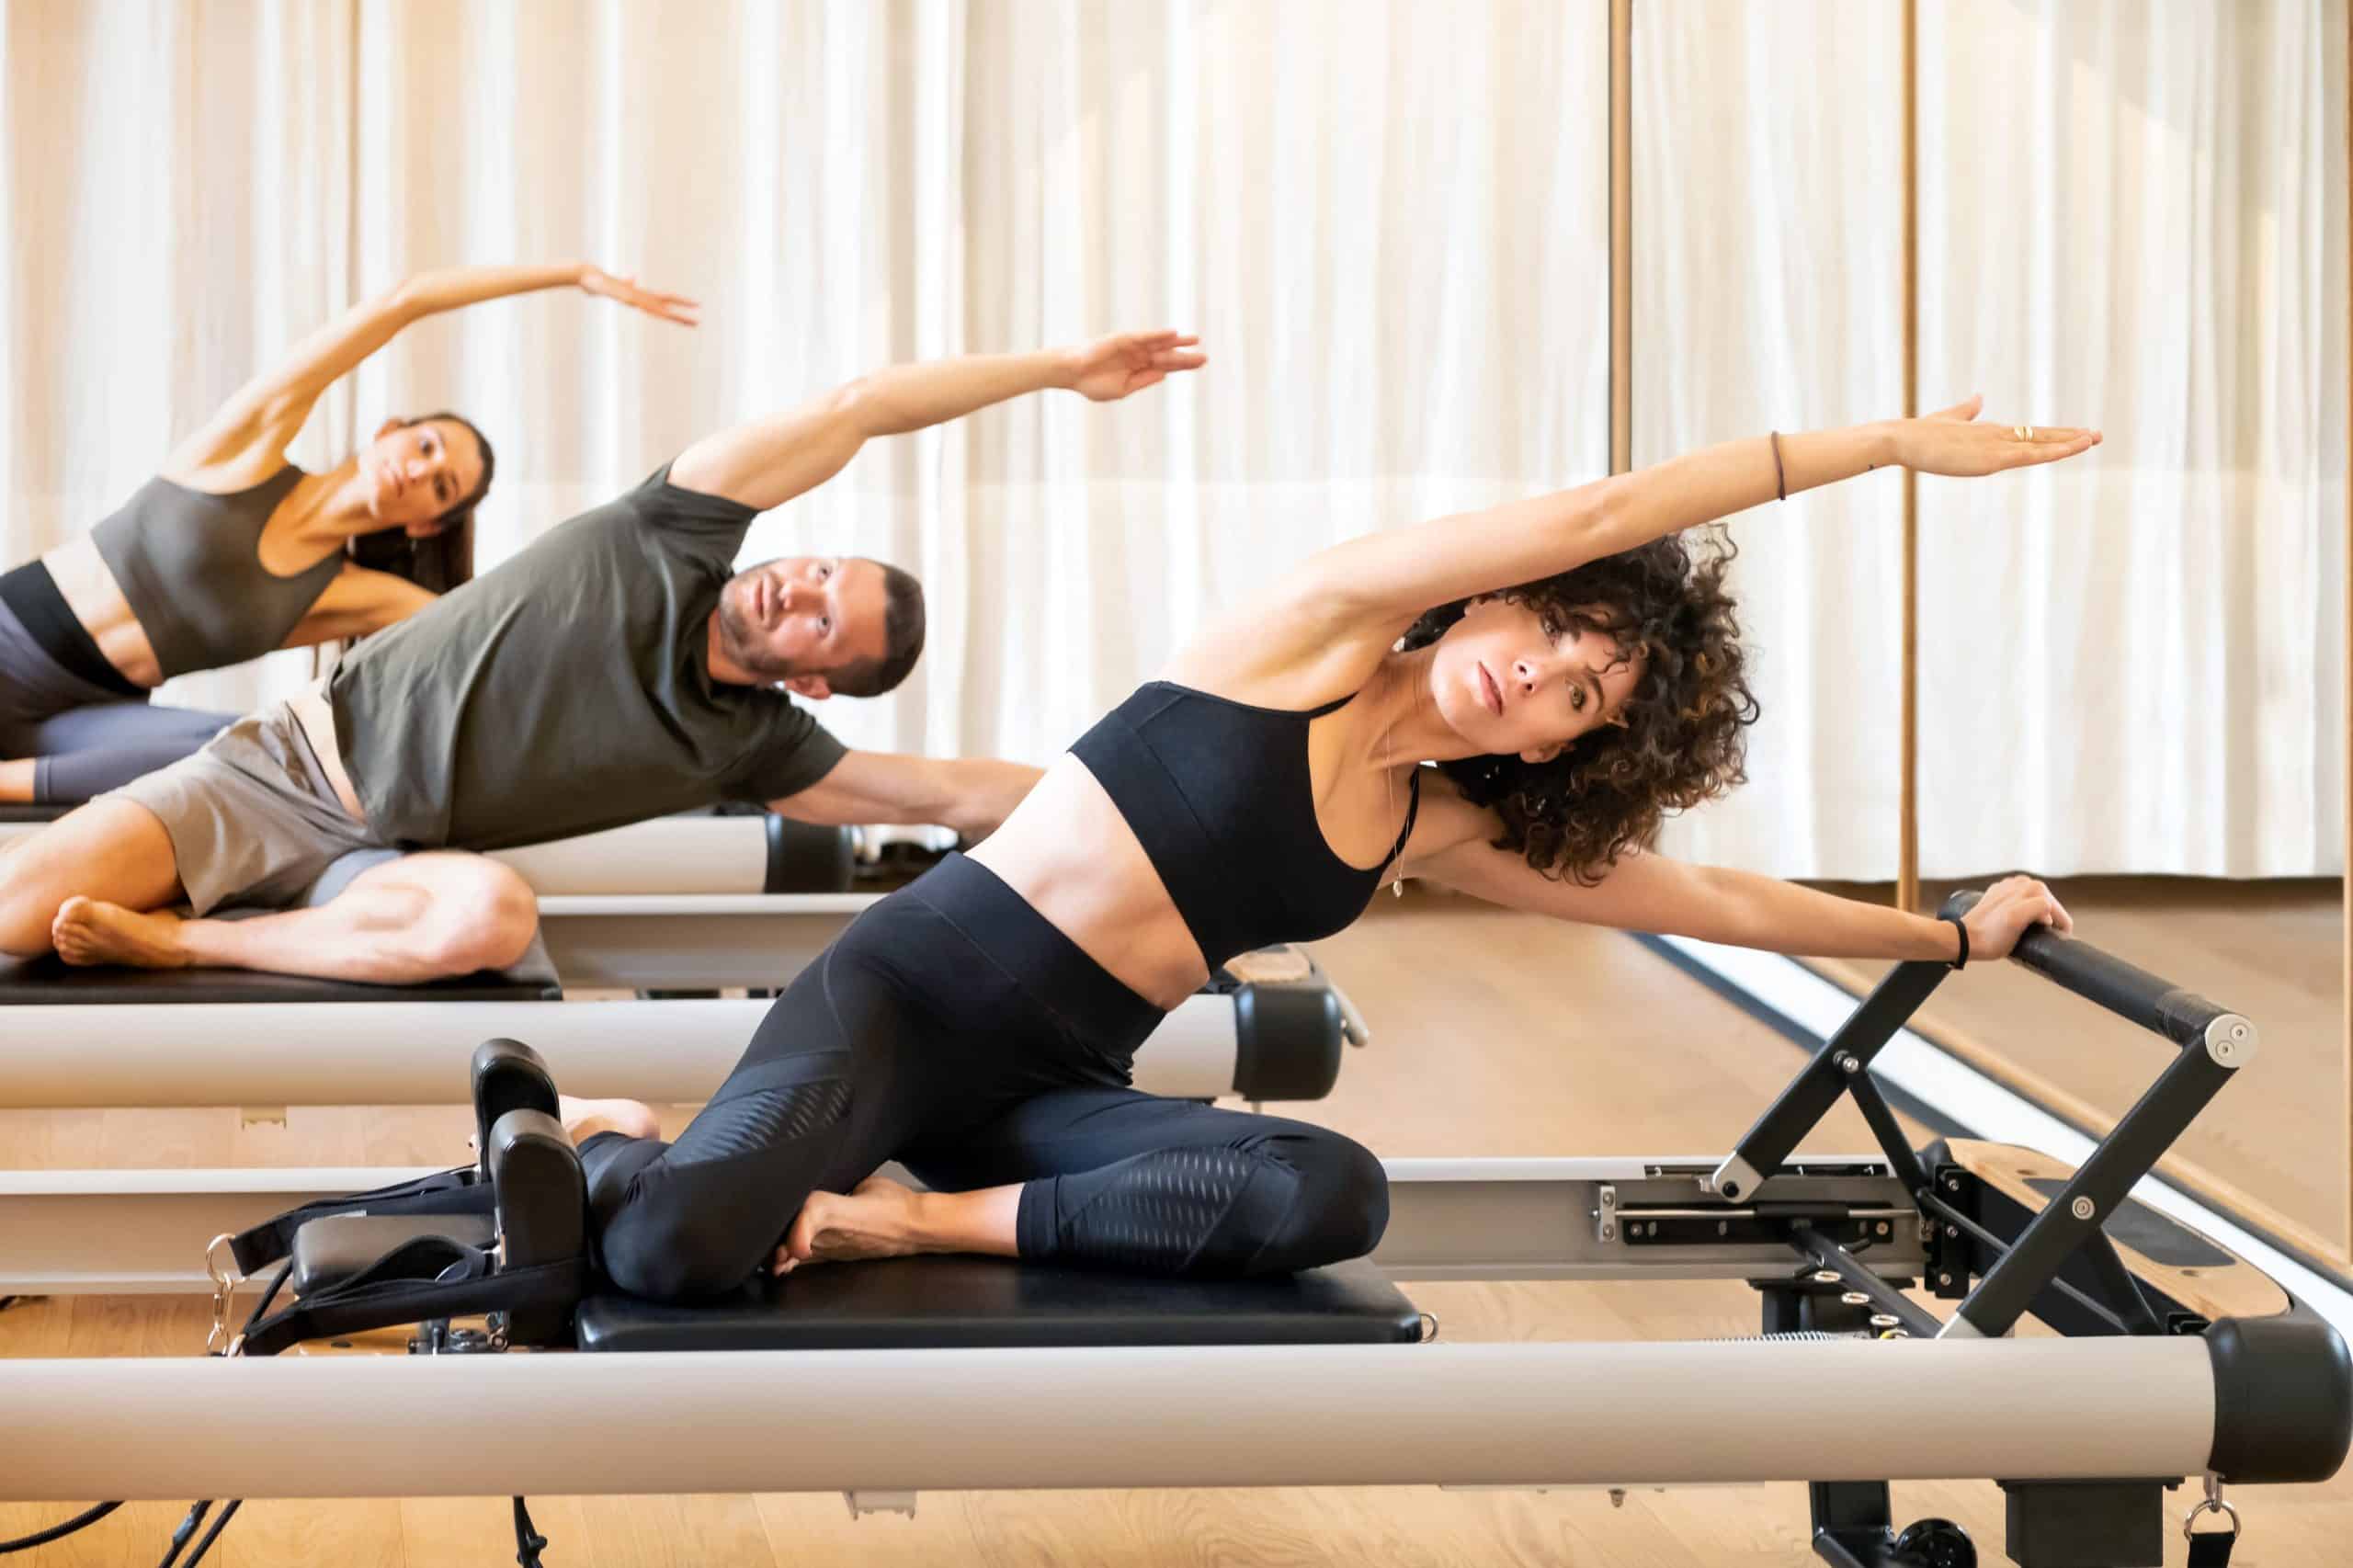 Barre Vs Pilates: Which Is Right For You? - BetterMe